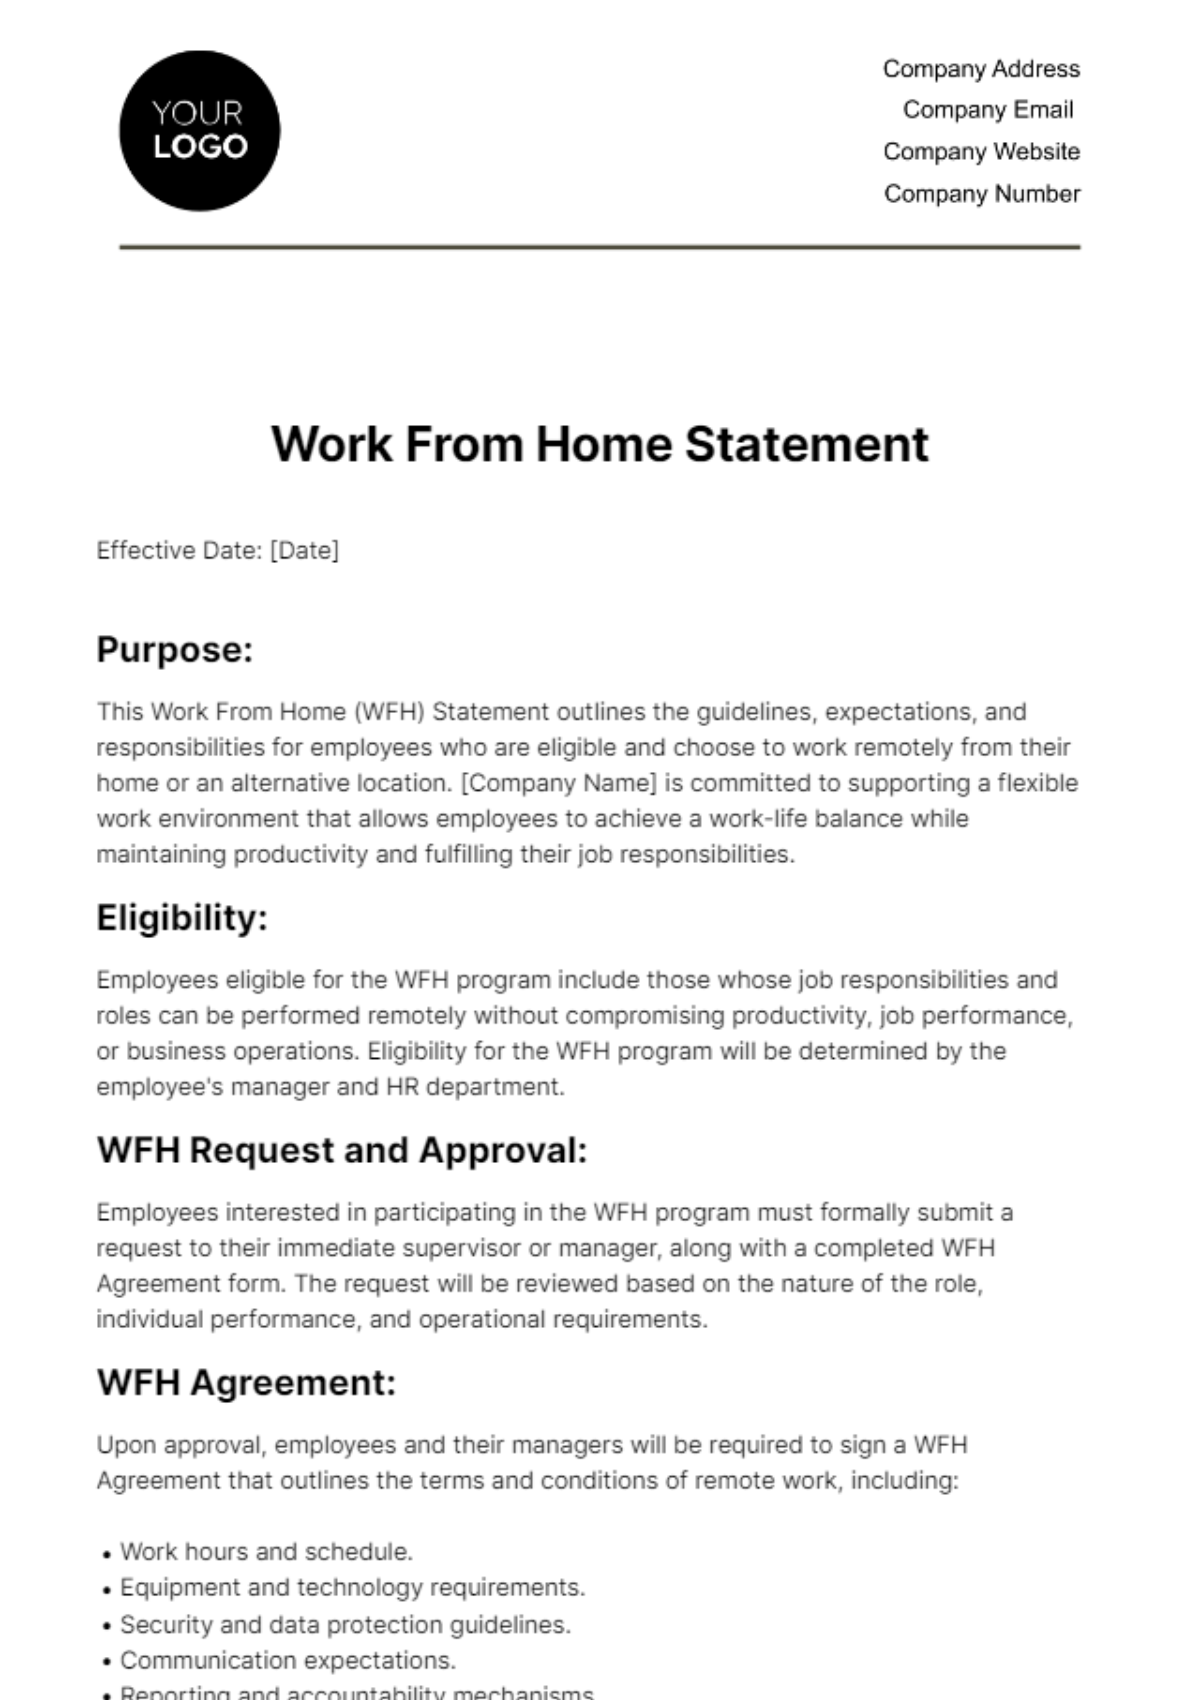 Free Work From Home Statement HR Template